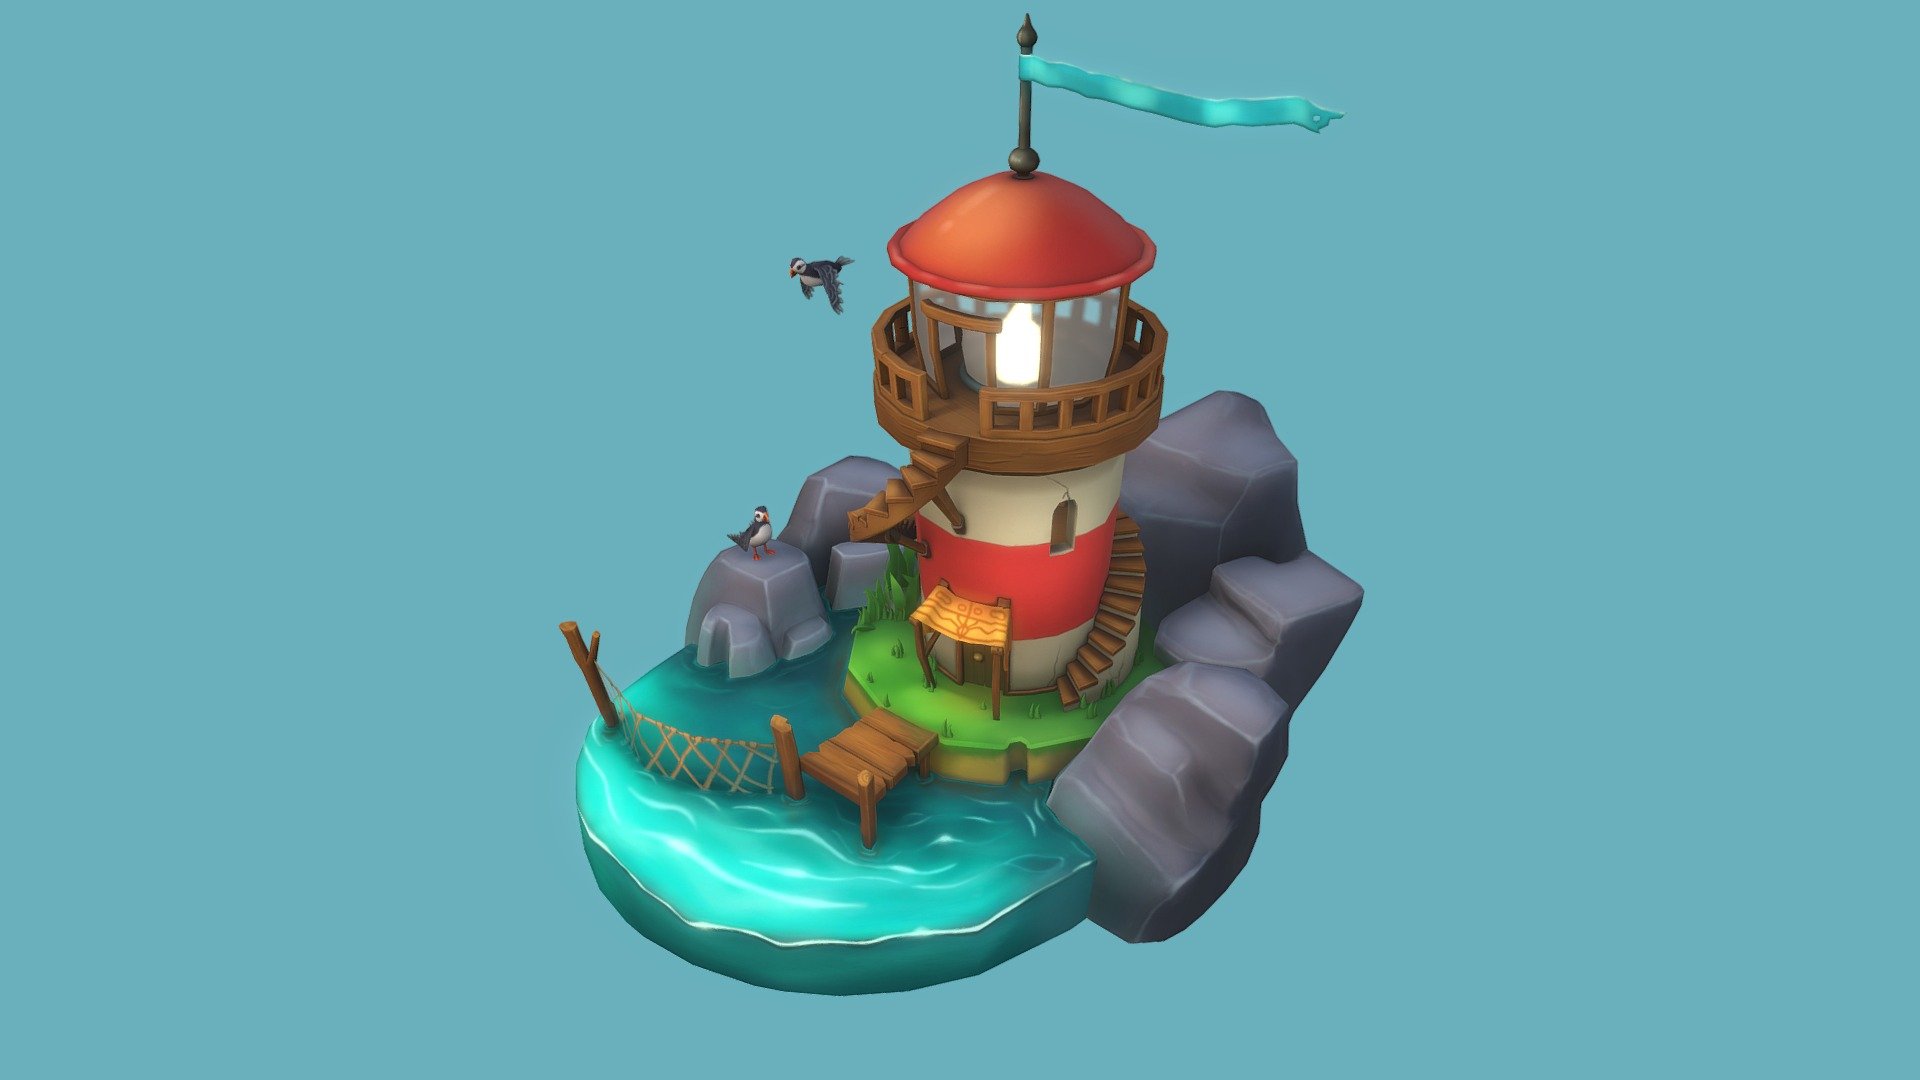 Keyyaa! Check out my work, i’ll be glad if you share your opinion about it.

Concept art: author not found :(

Subscribe to me not to miss my next works.

Don’t forget to look my Artstation page https://www.artstation.com/progressive - Lighthouse - 3D model by OVA (@ovaland) 3d model